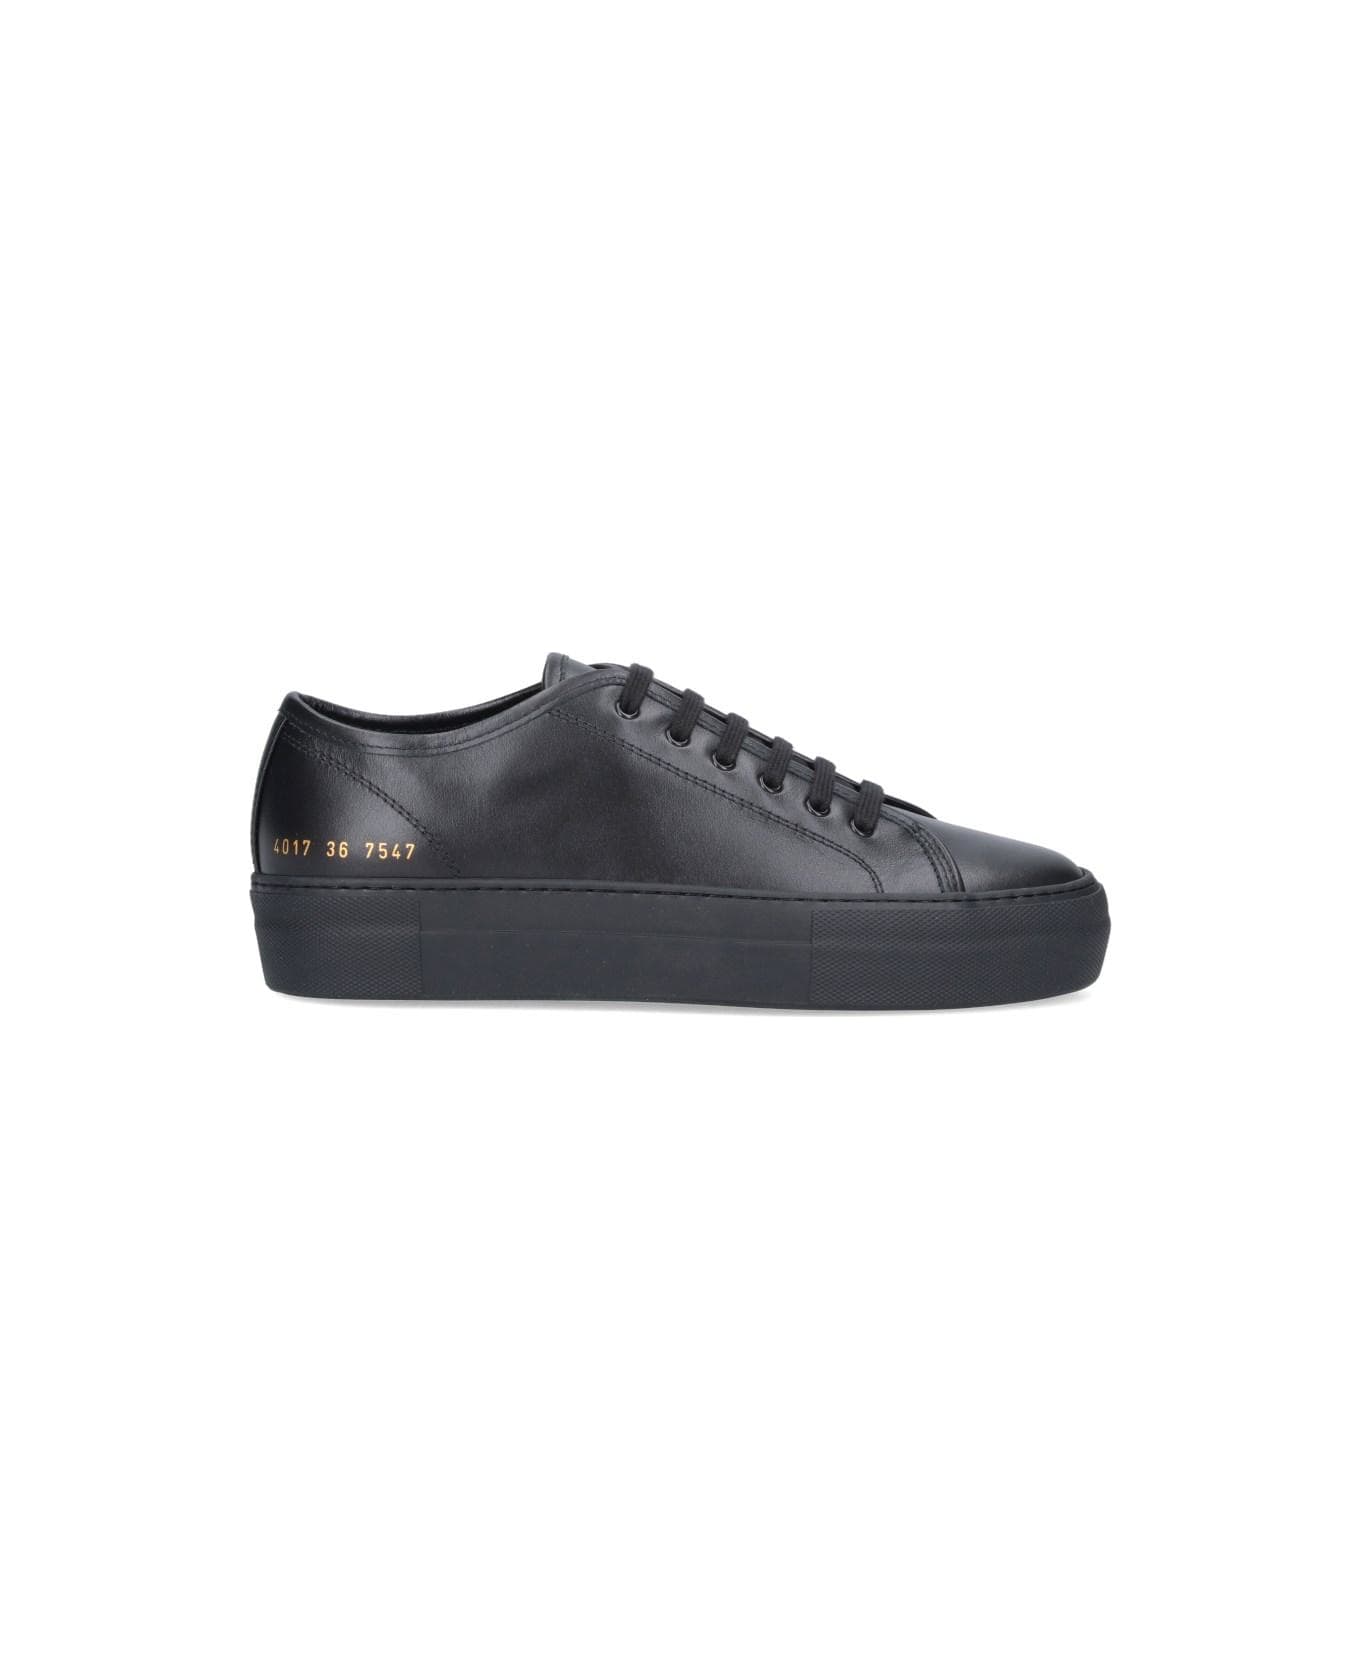 Common Projects Sneakers 'tournament' - Black スニーカー